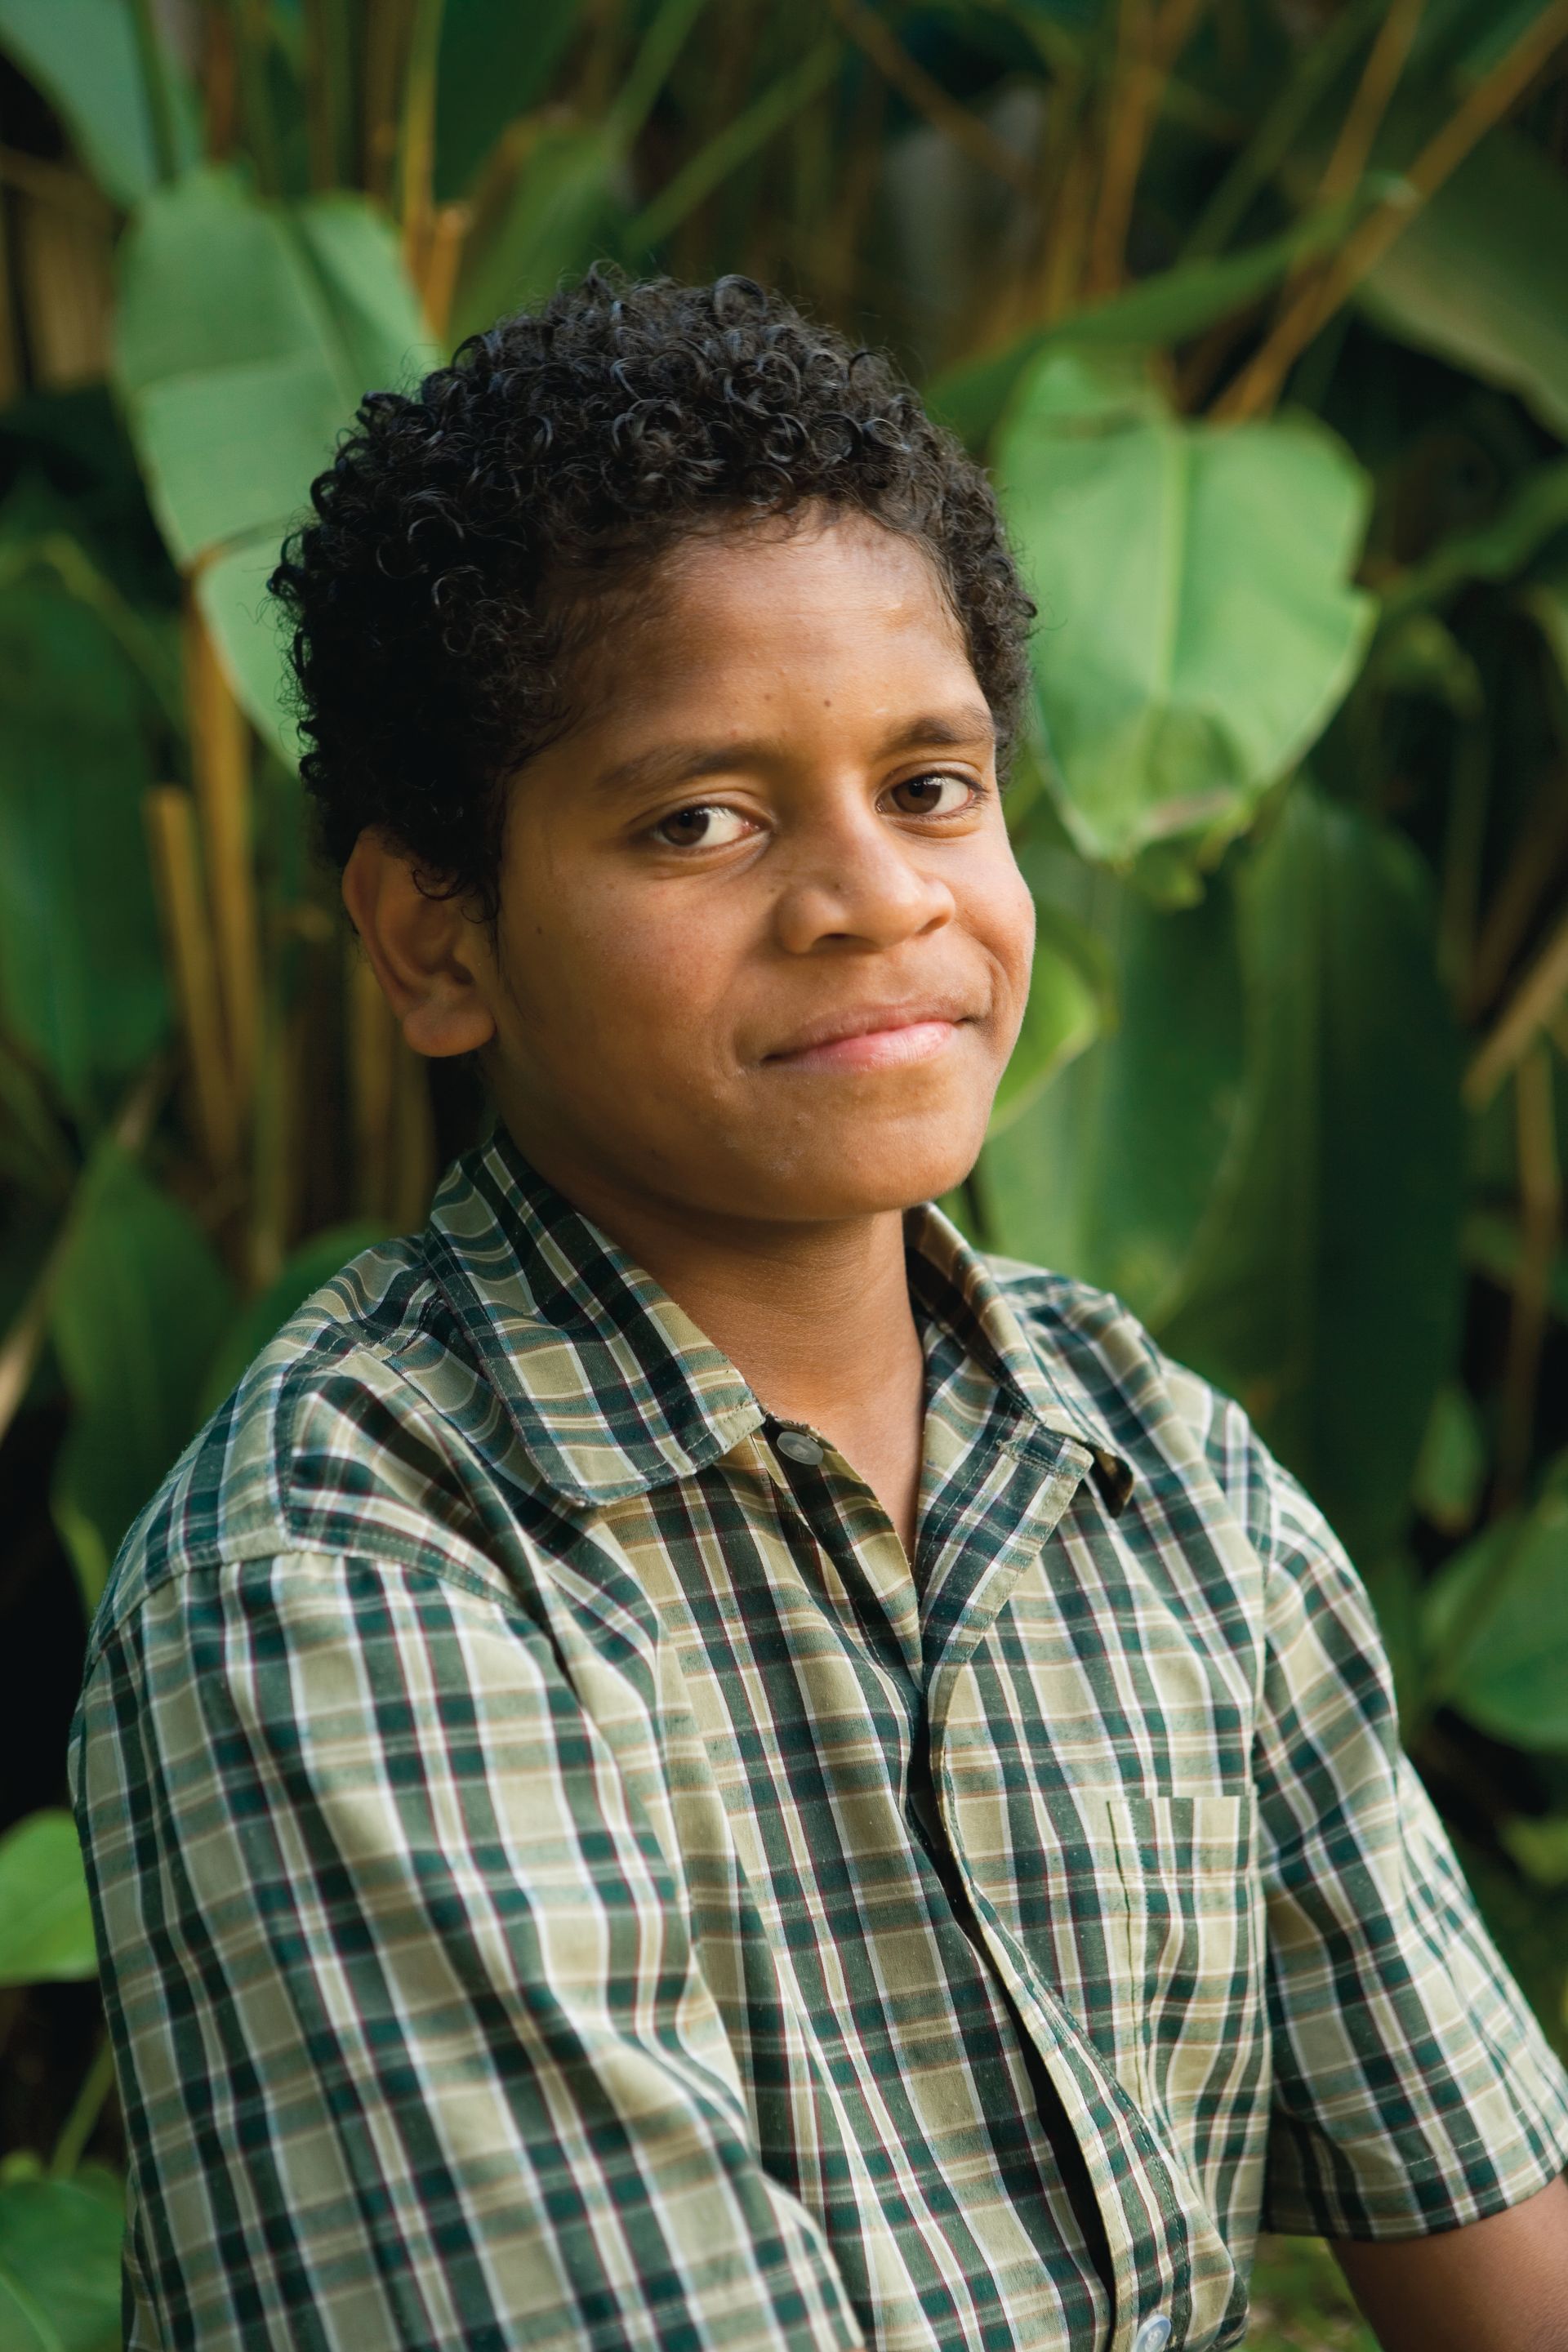 A portrait of a young man in Fiji.